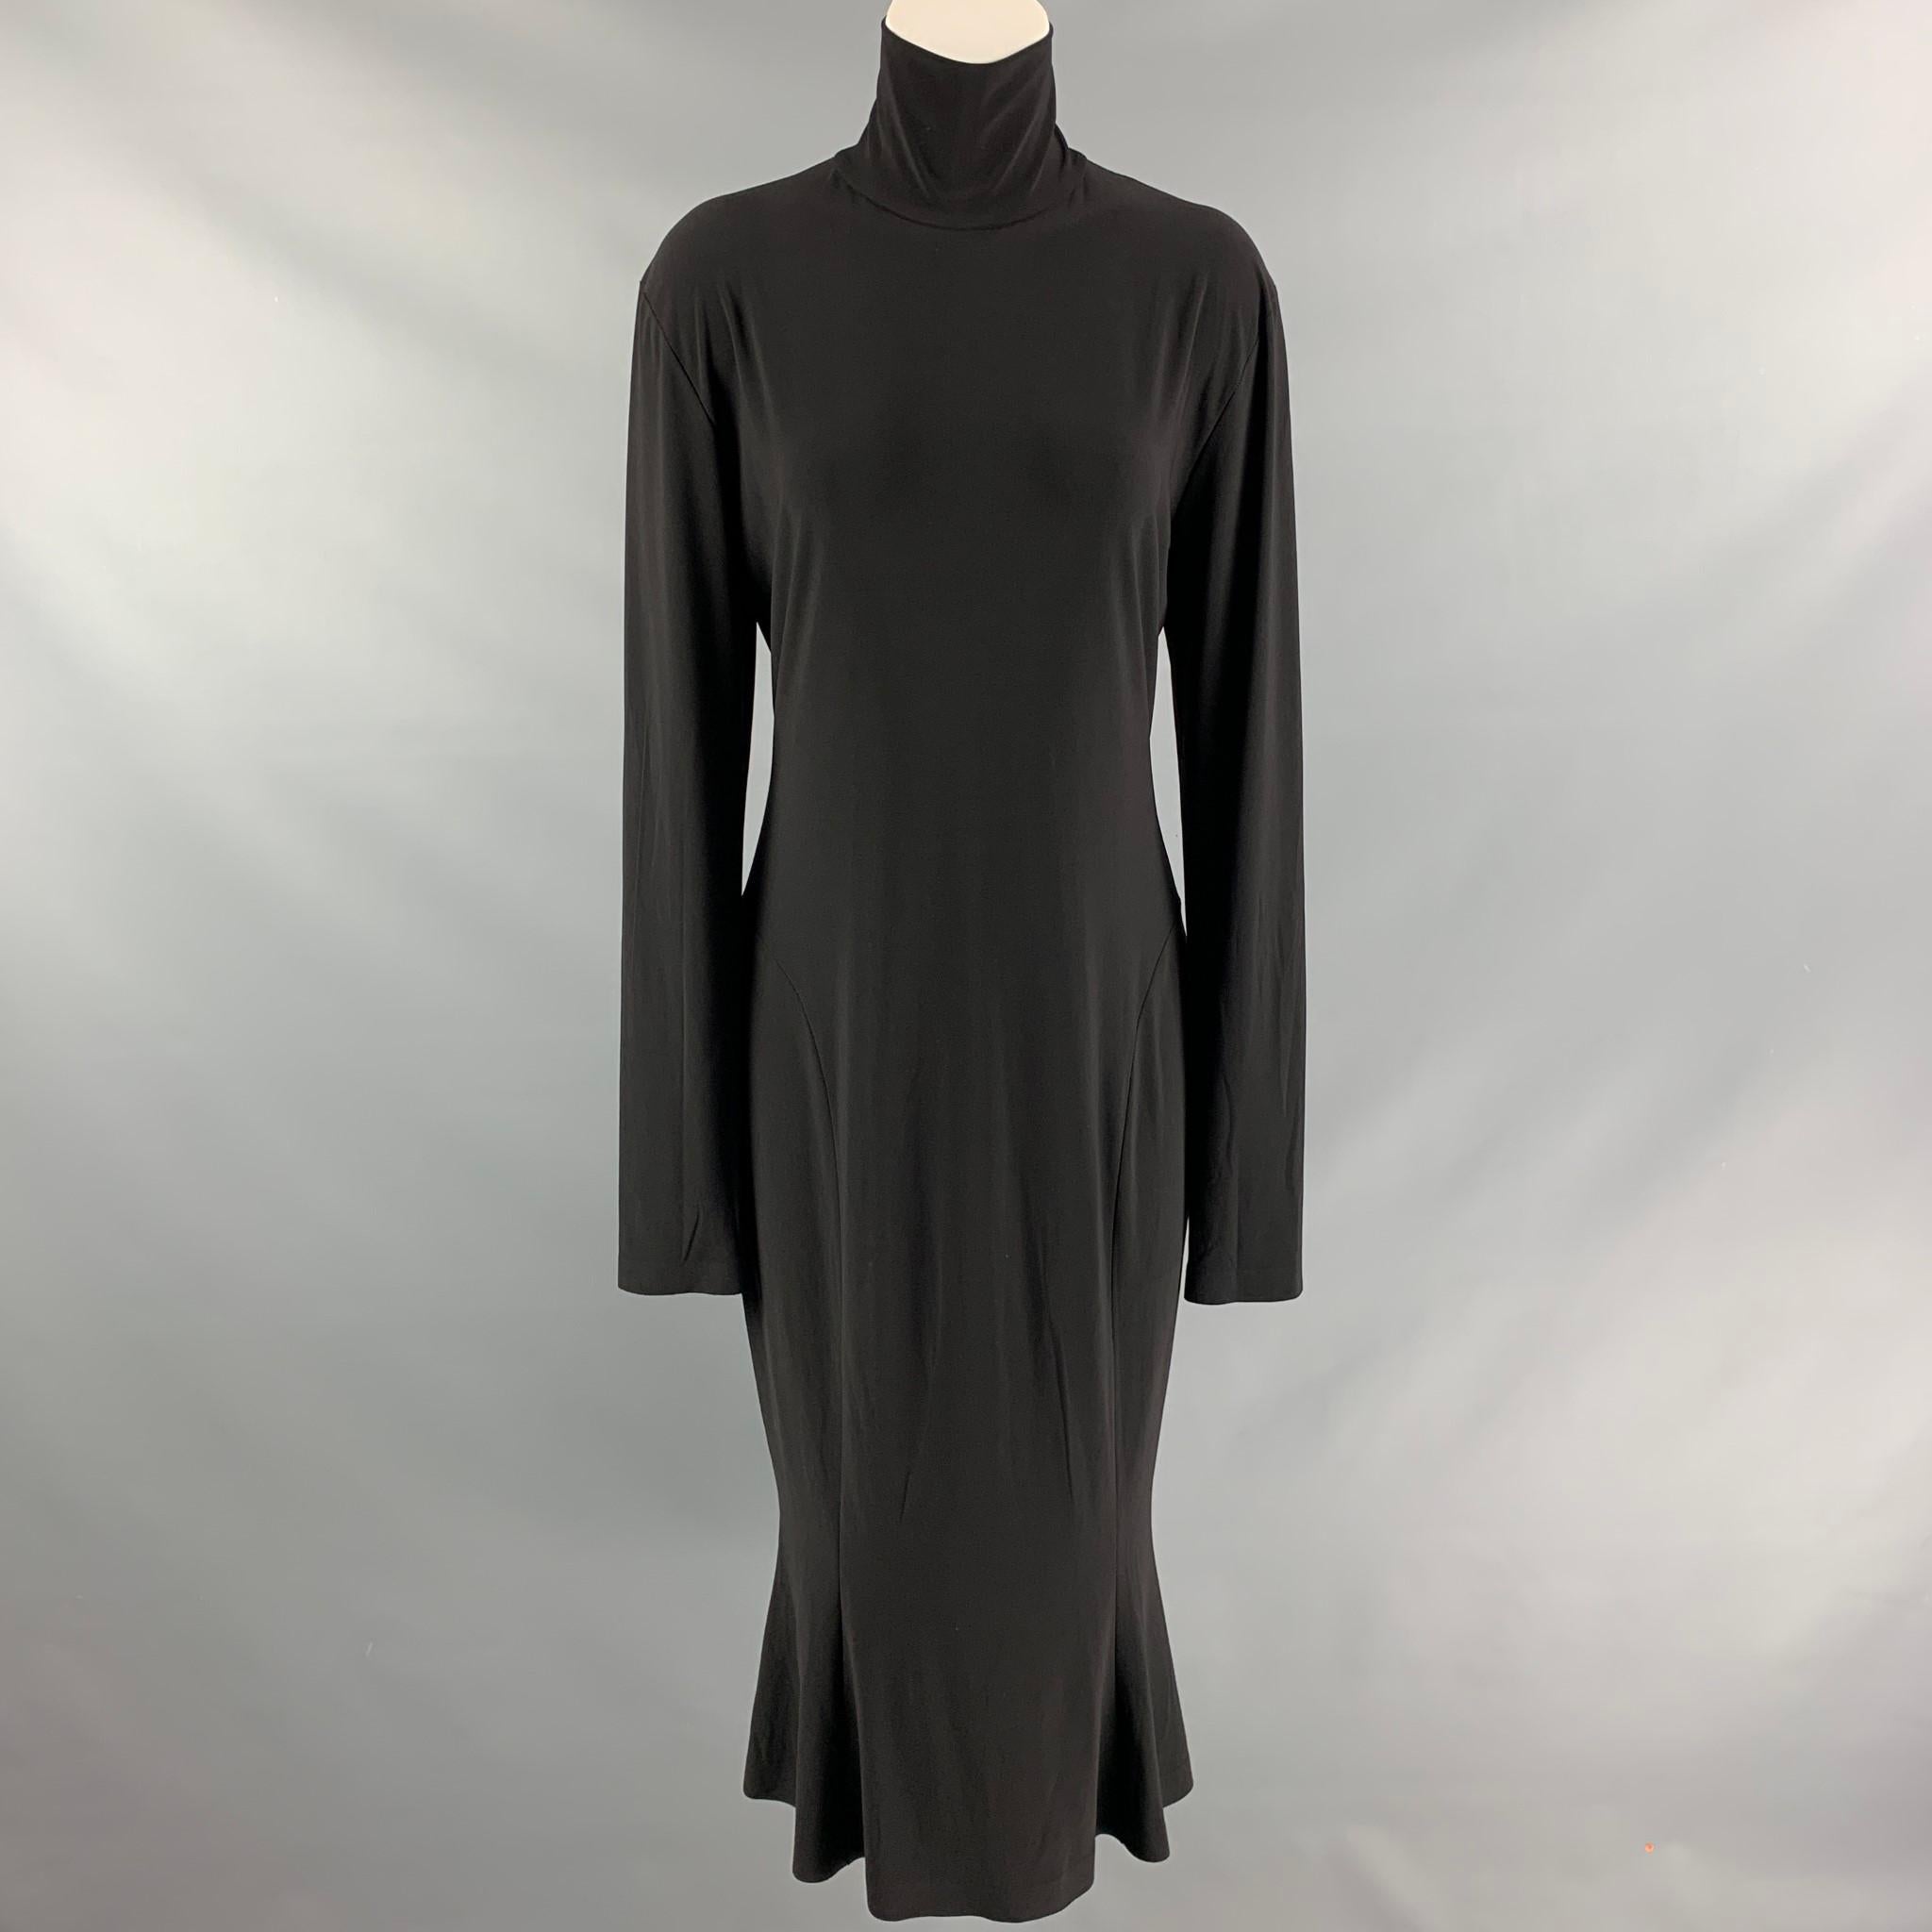 NORMA KAMALI long sleeve fish tail maxi dress comes in black polyester and spandex jersey featuring turtleneck and half zip closure at center back.

New with Tags.
Marked: 40

Measurements:

Shoulder: 18 in
Bust: 40 in
Waist: 34 in
Hip: 40